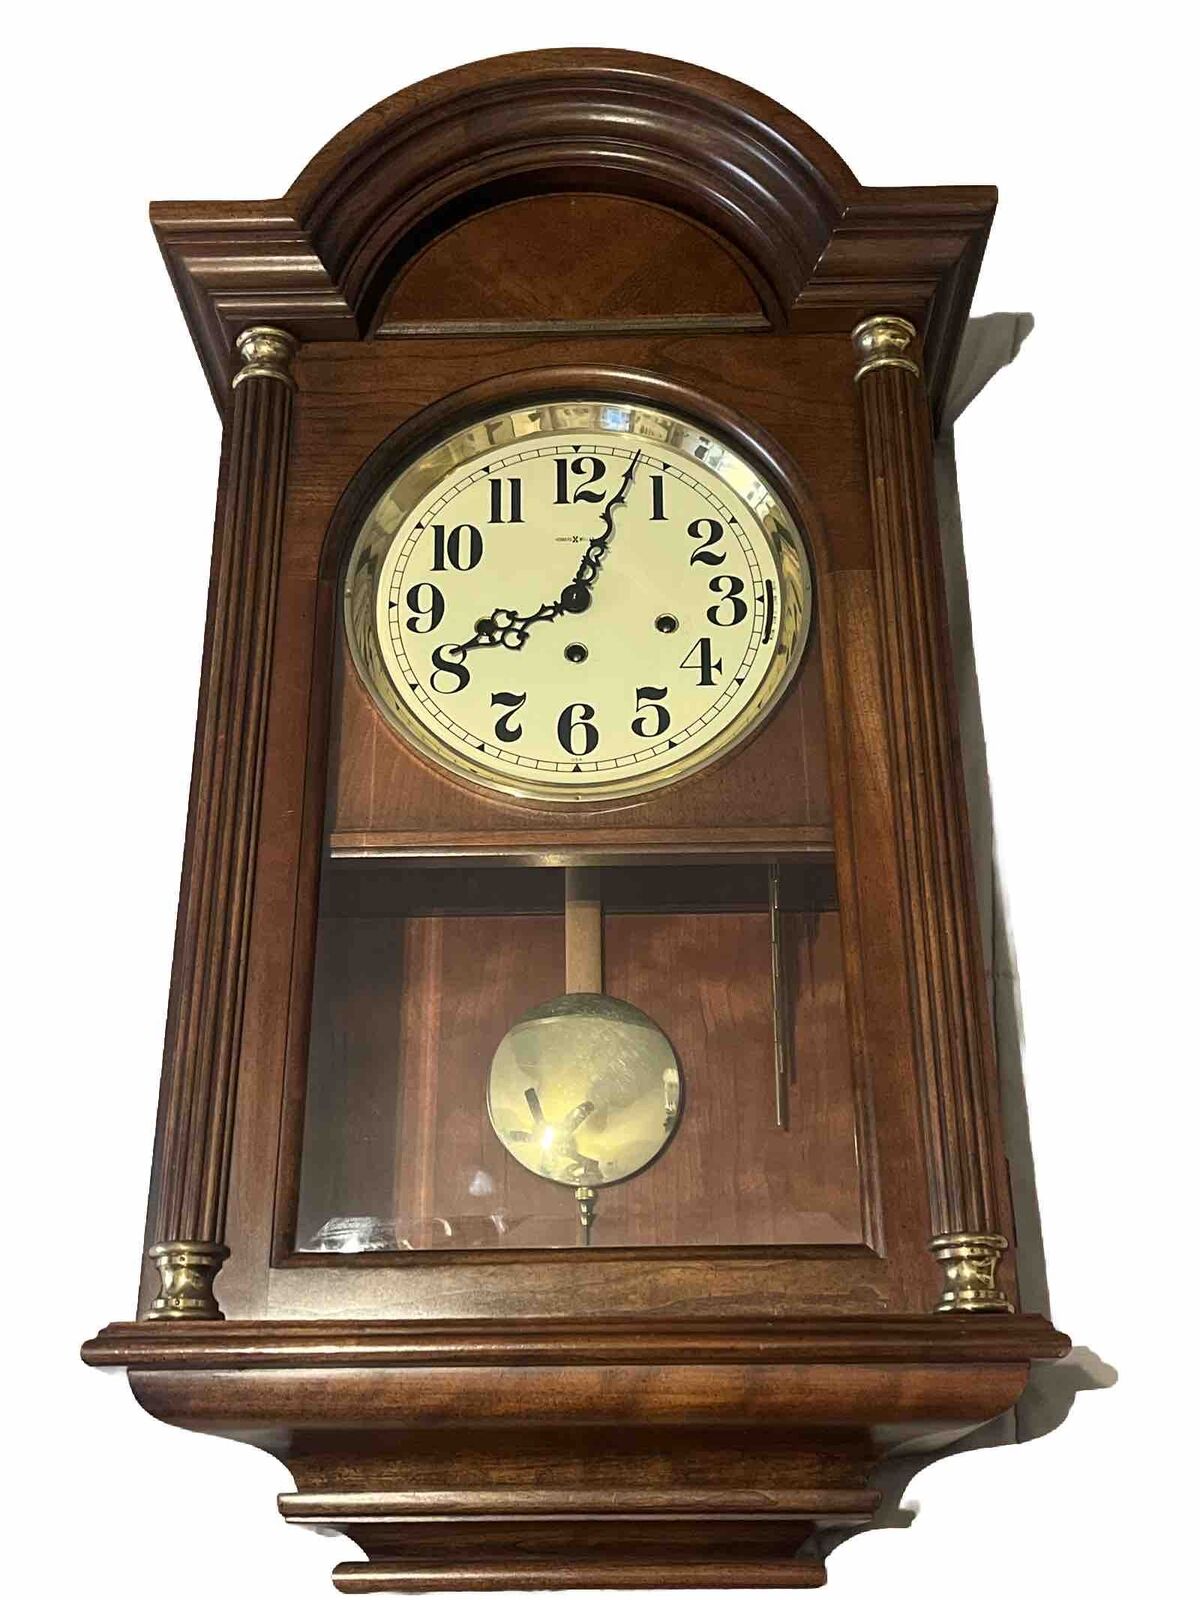 Howard Miller #612-670 Cherry Triple Chime Wall Clock IMMACULATE CONDITION